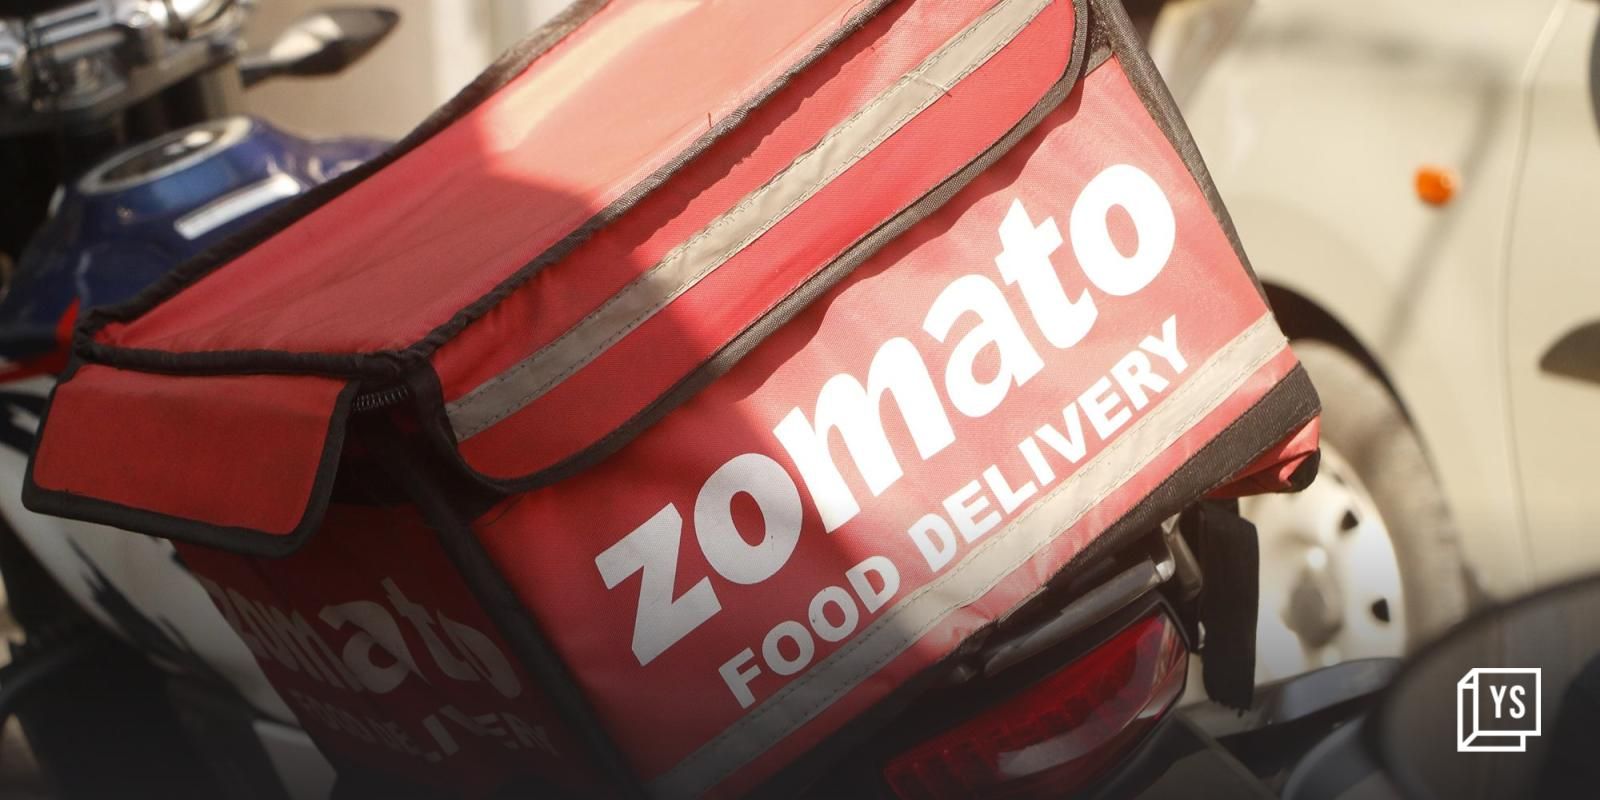 Zomato gains 55% food delivery market share in CY22: JM Financial note